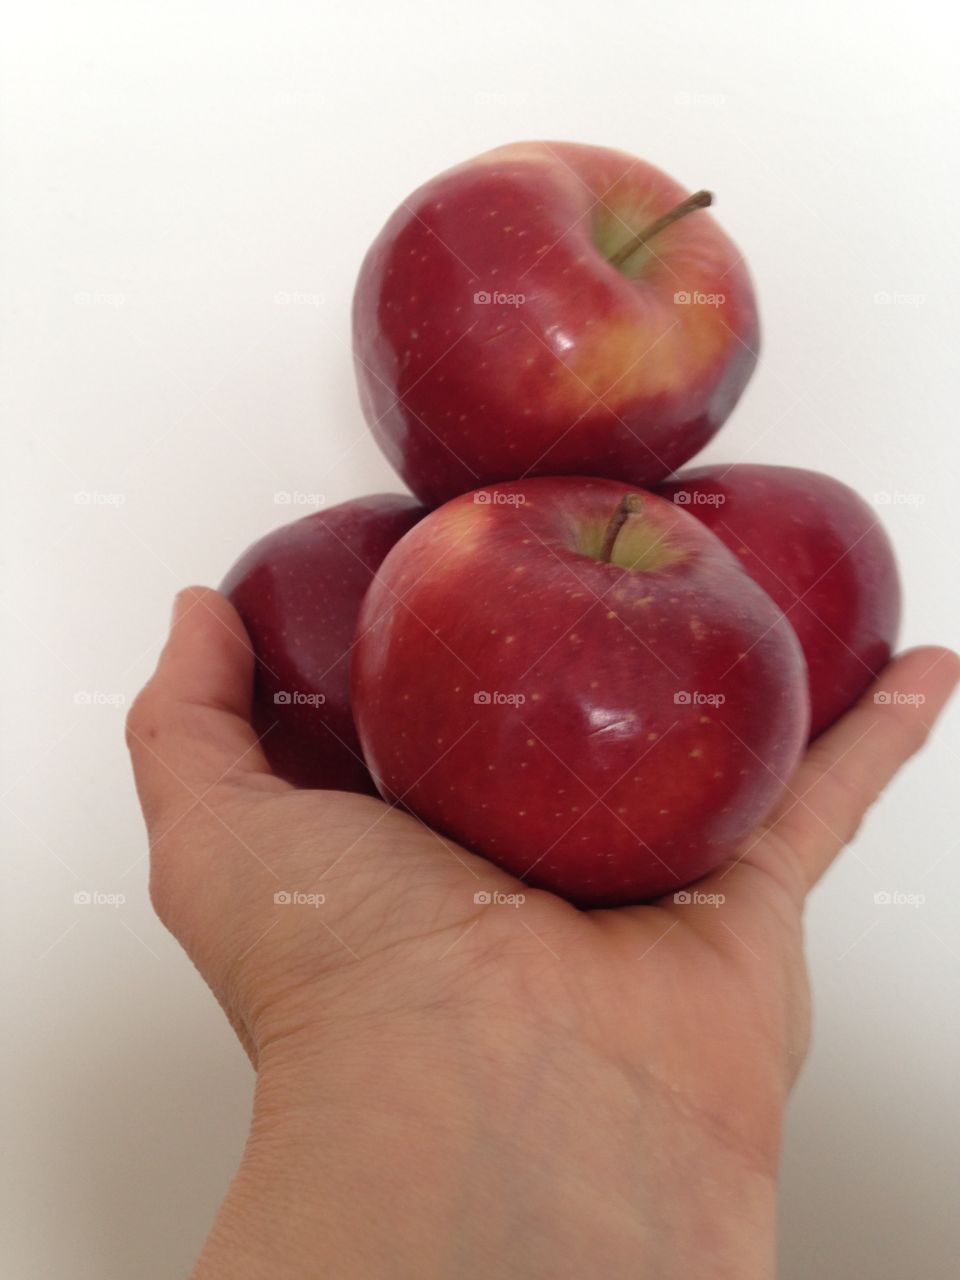 Person holding red apples in hand